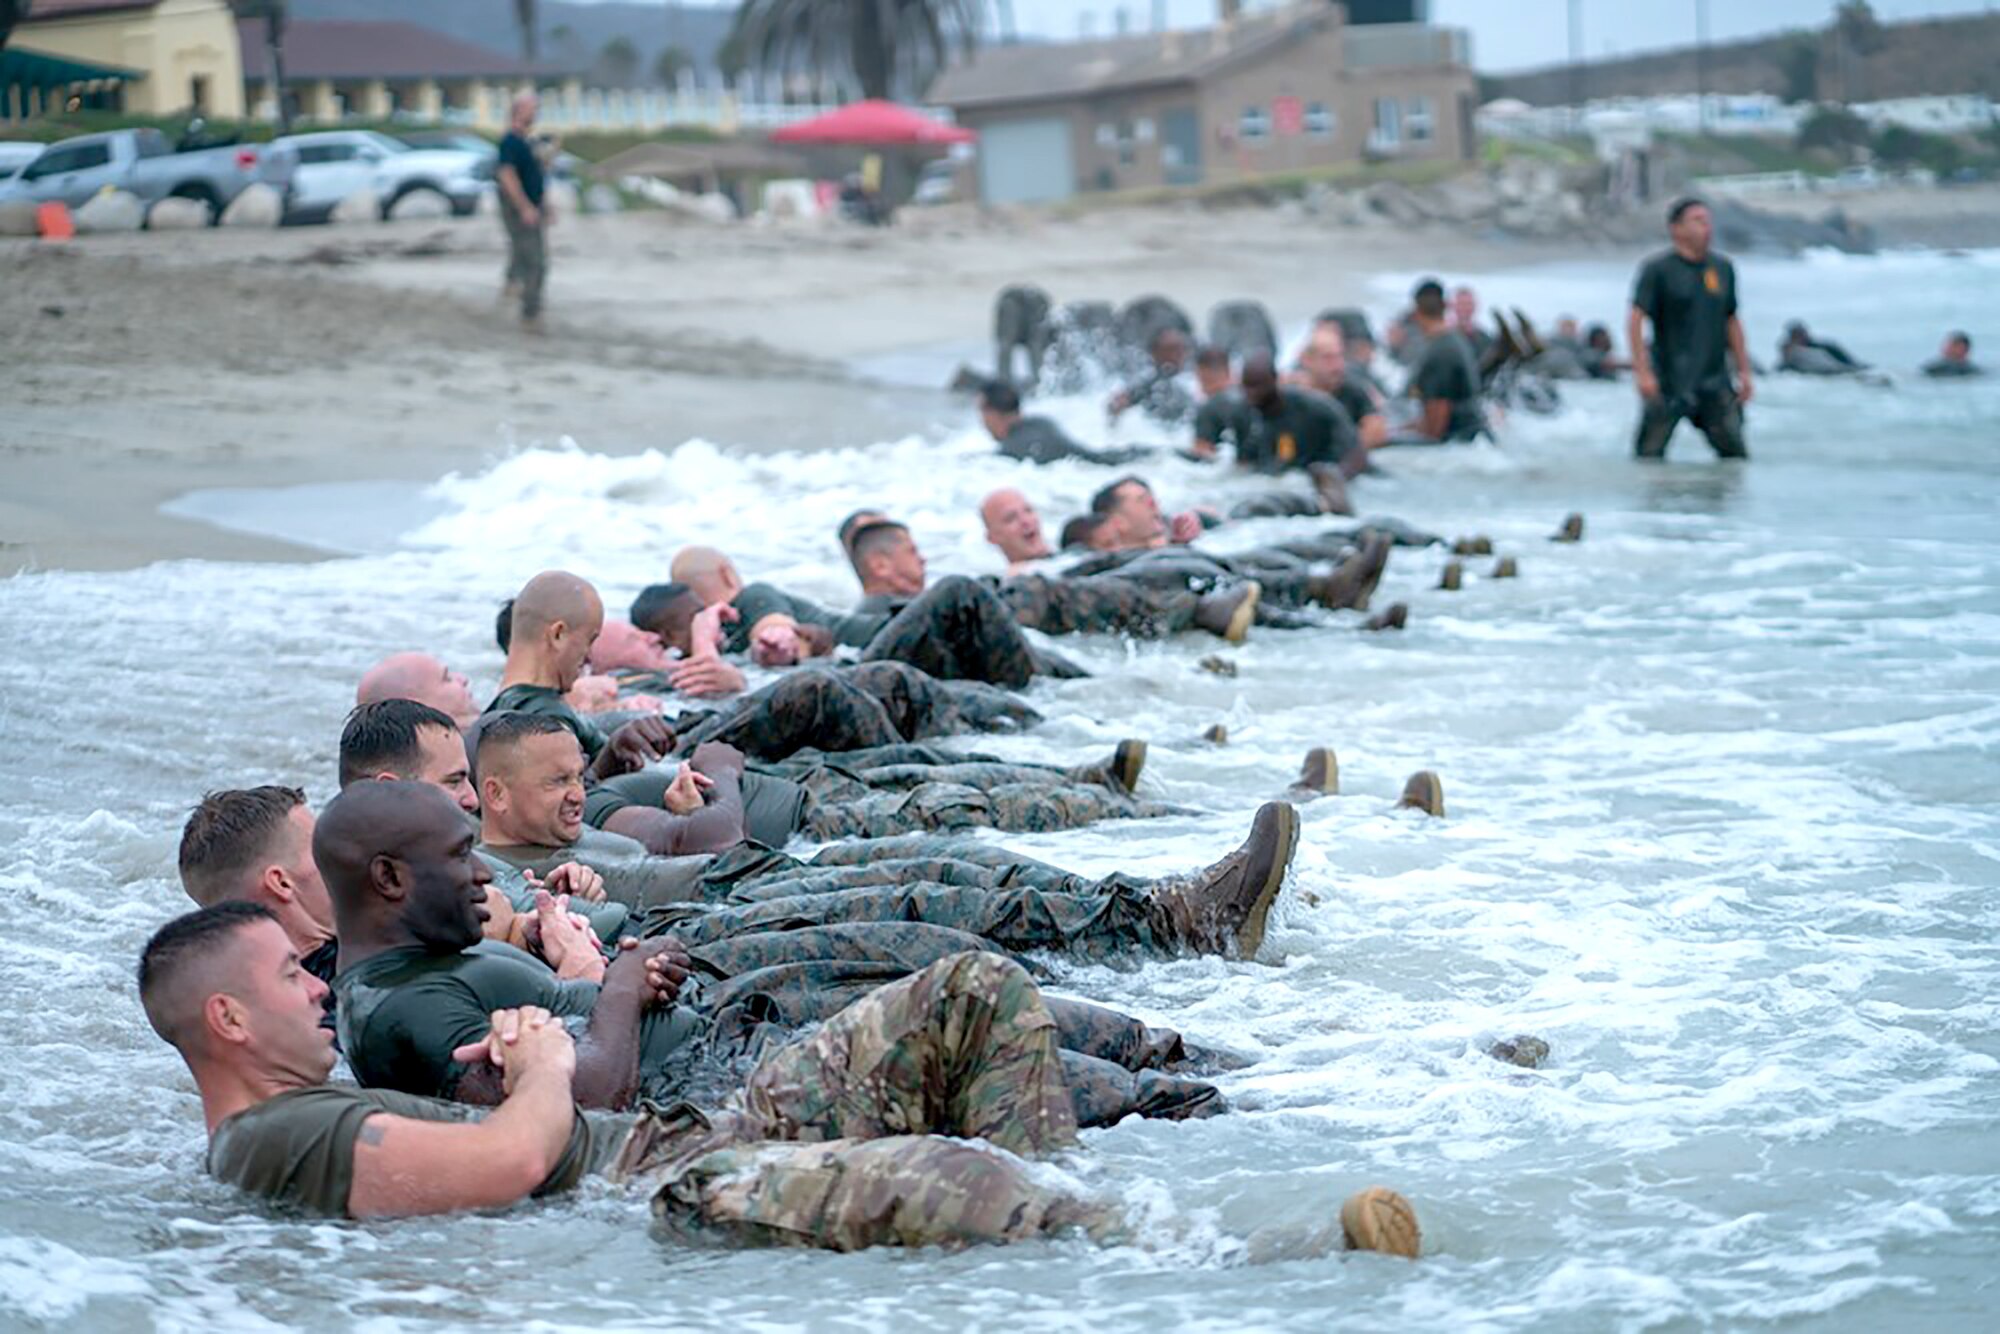 Master Sgt. Paul Willson (left) leads his group in physical training on the San Onofre Beach during the Marine Corps Staff NCO Academy at Camp Pendleton, California.